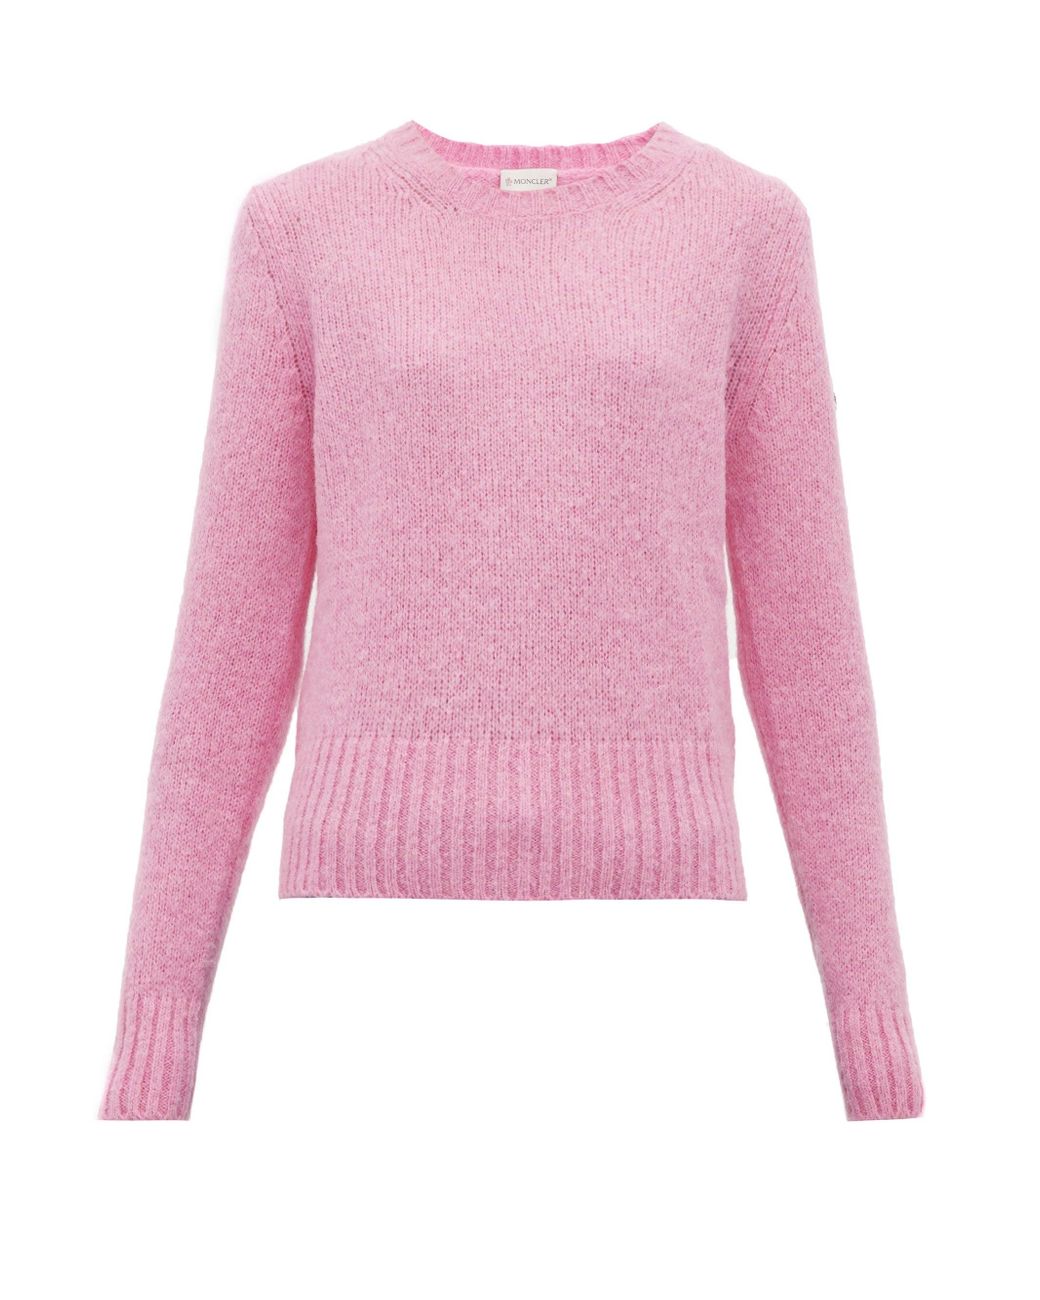 Moncler Wool Logo-patch Sweater in Pink - Lyst